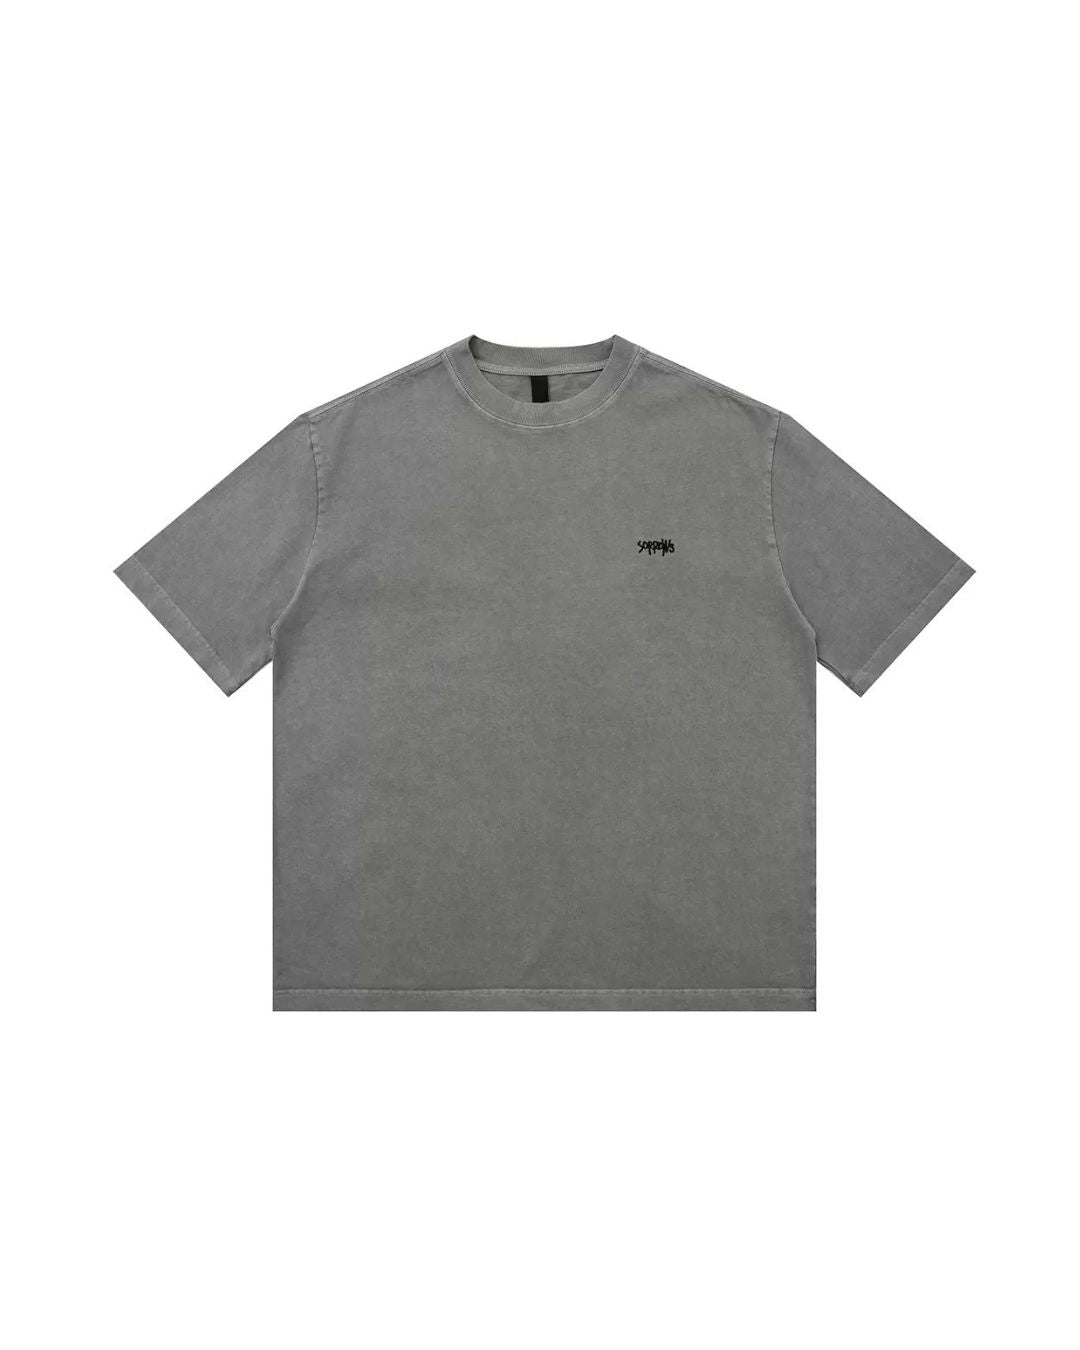 Washed Color One Point T-shirt　ST122